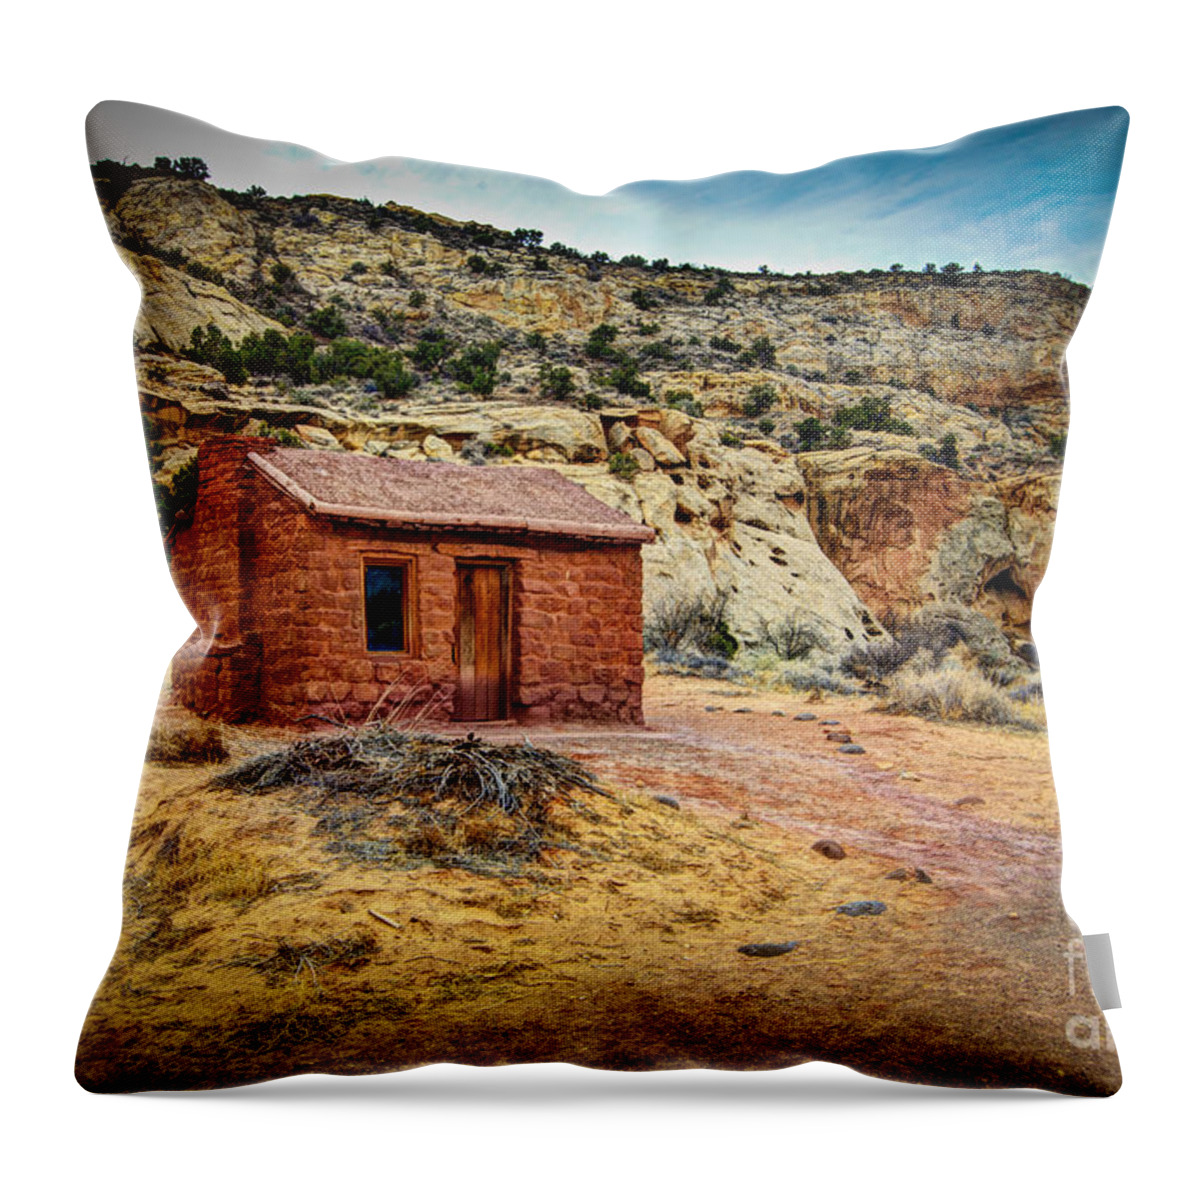 Bob And Nancy Kendrick Throw Pillow featuring the photograph Home Sweet Home by Bob and Nancy Kendrick